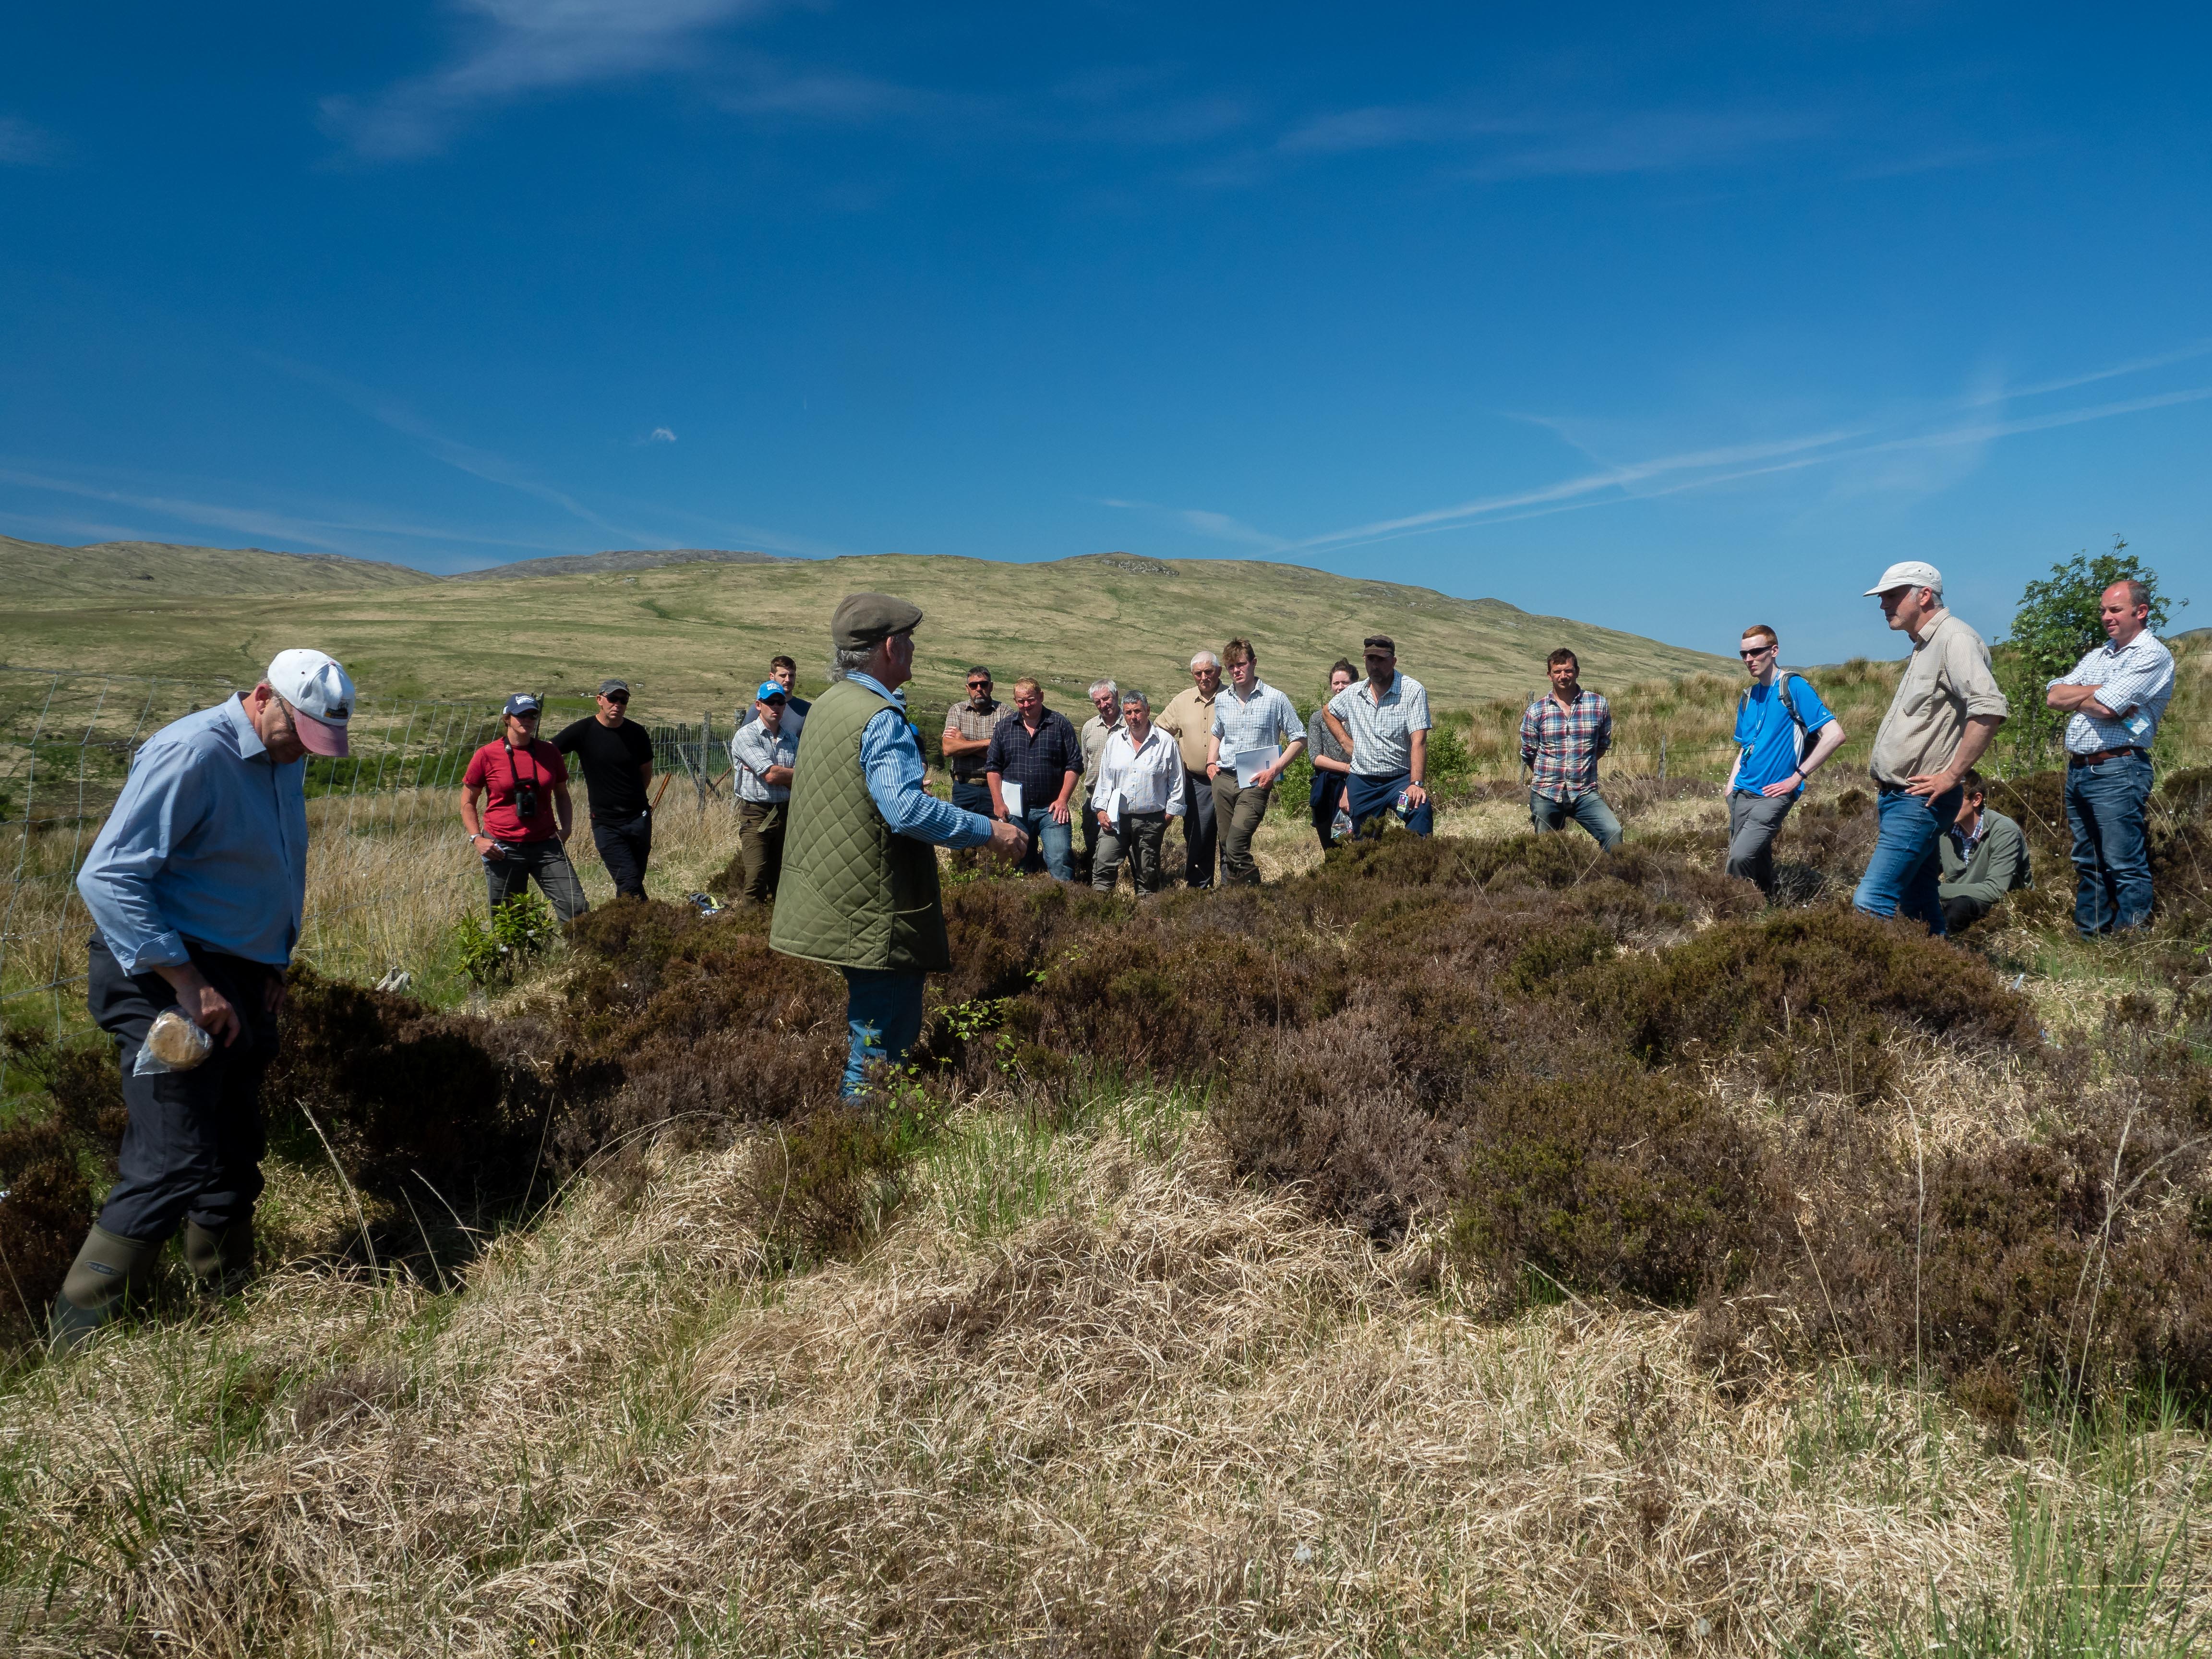 Upland habitats event on Jura - group of people in an upland habitat learning about what indicators to look for when assessing for herbivore damage